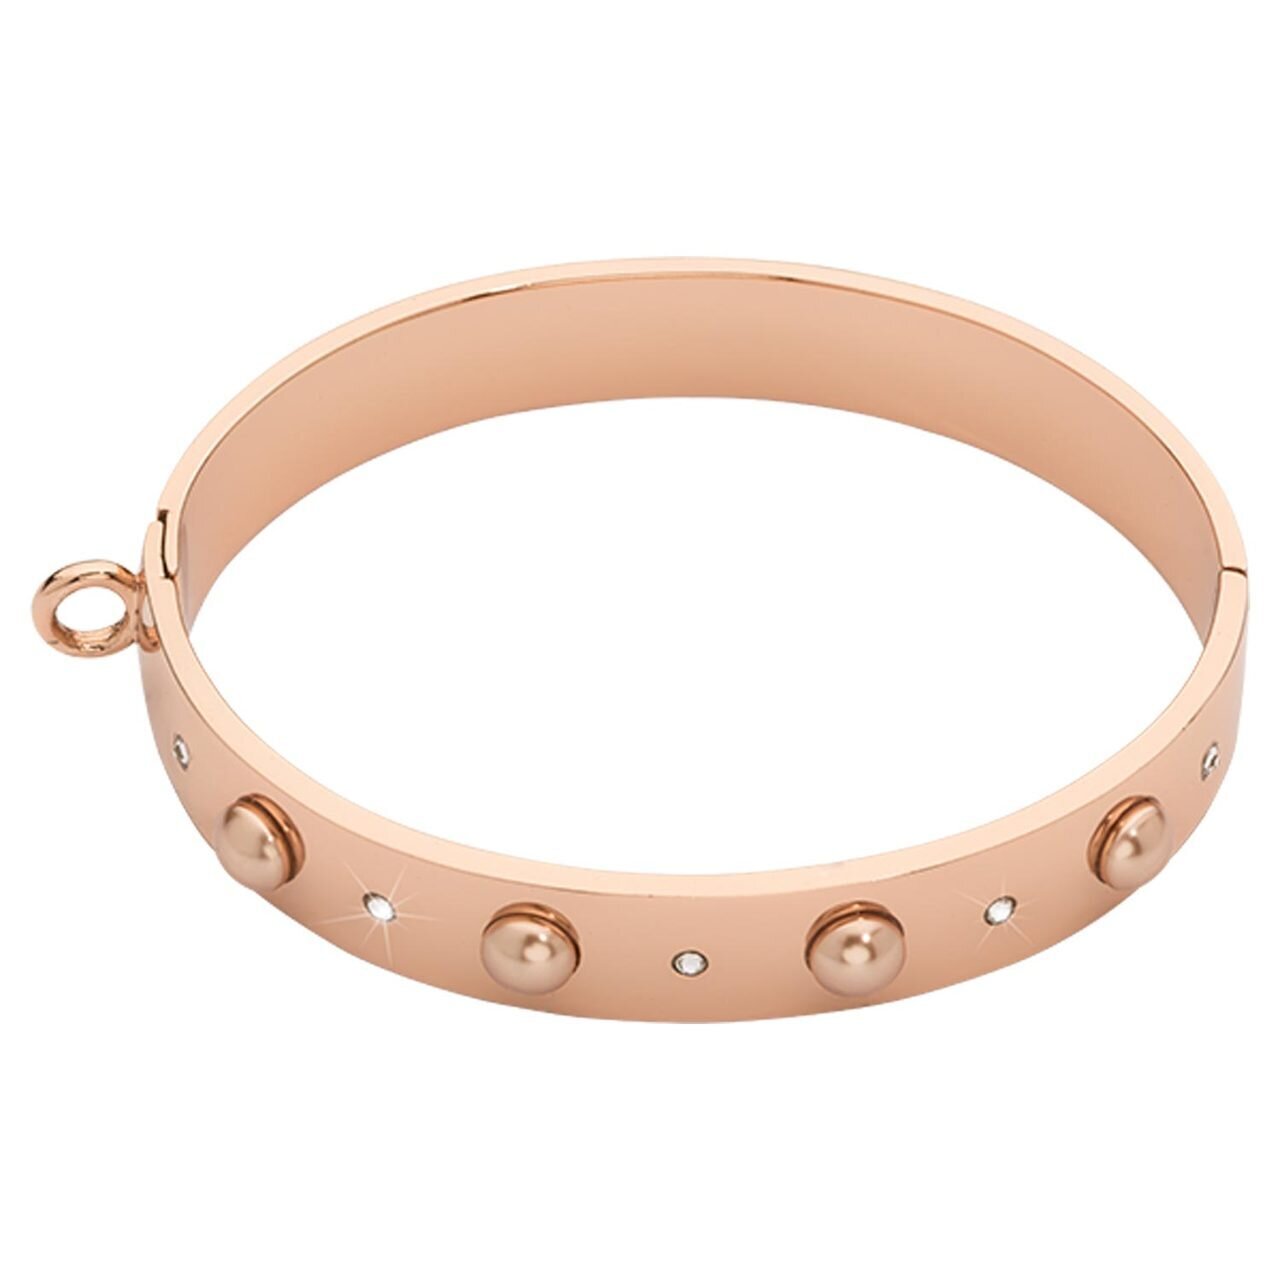 Nikki Lissoni Bangle of 1cm with Rose Pearls Swarovski Crystals One Loop To Attach A Charm Rose Gold-plated 17cm B1144RG17